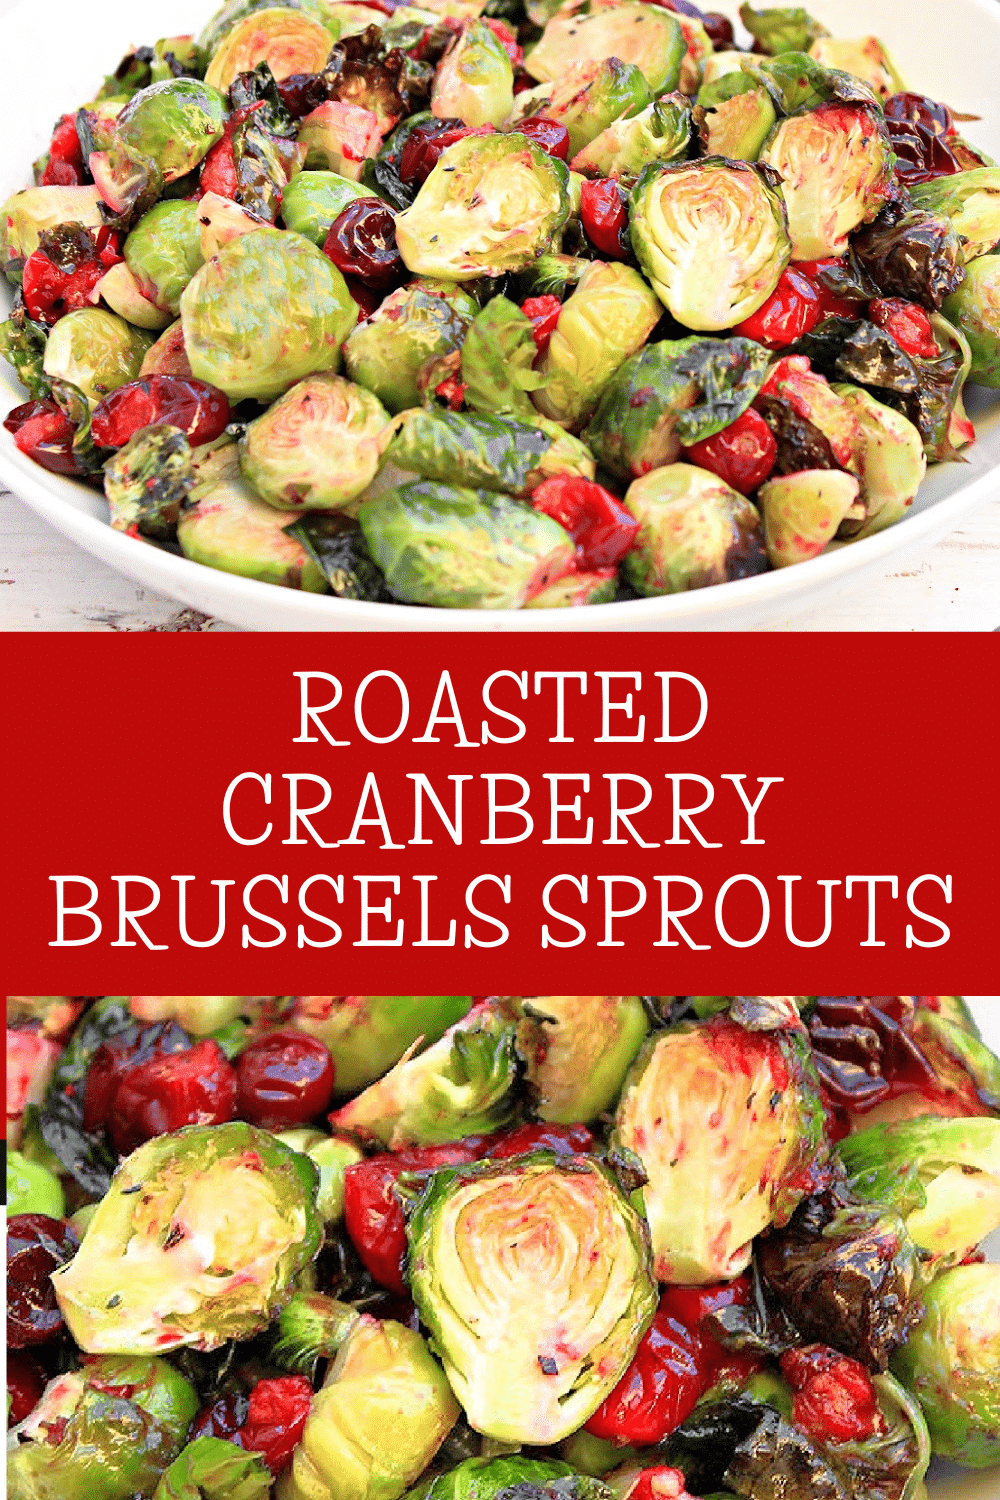 Roasted Cranberry Brussels Sprouts ~ Crispy Brussels sprouts roasted with tangy and sweet cranberries - an easy side dish for the holiday season! via @thiswifecooks